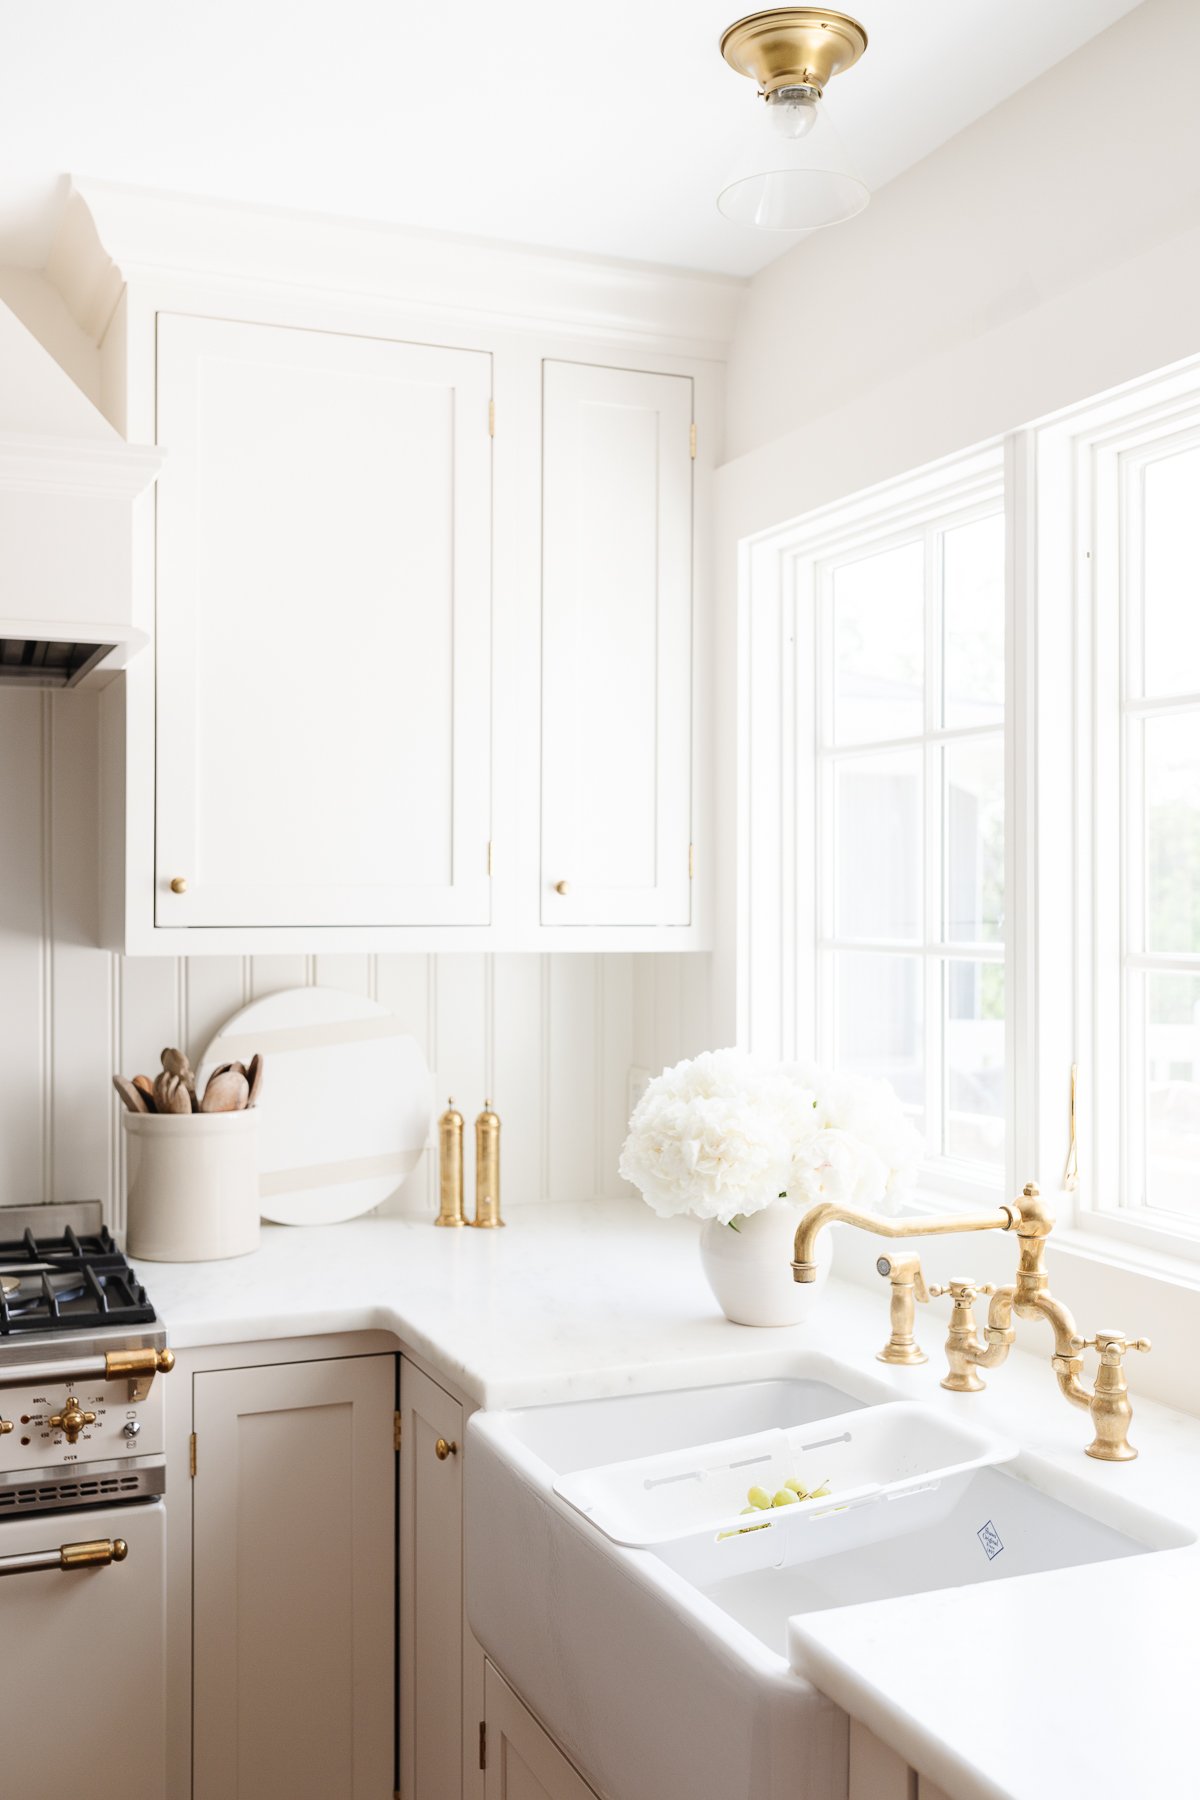 A white kitchen with a farmhouse sink and white flowers.